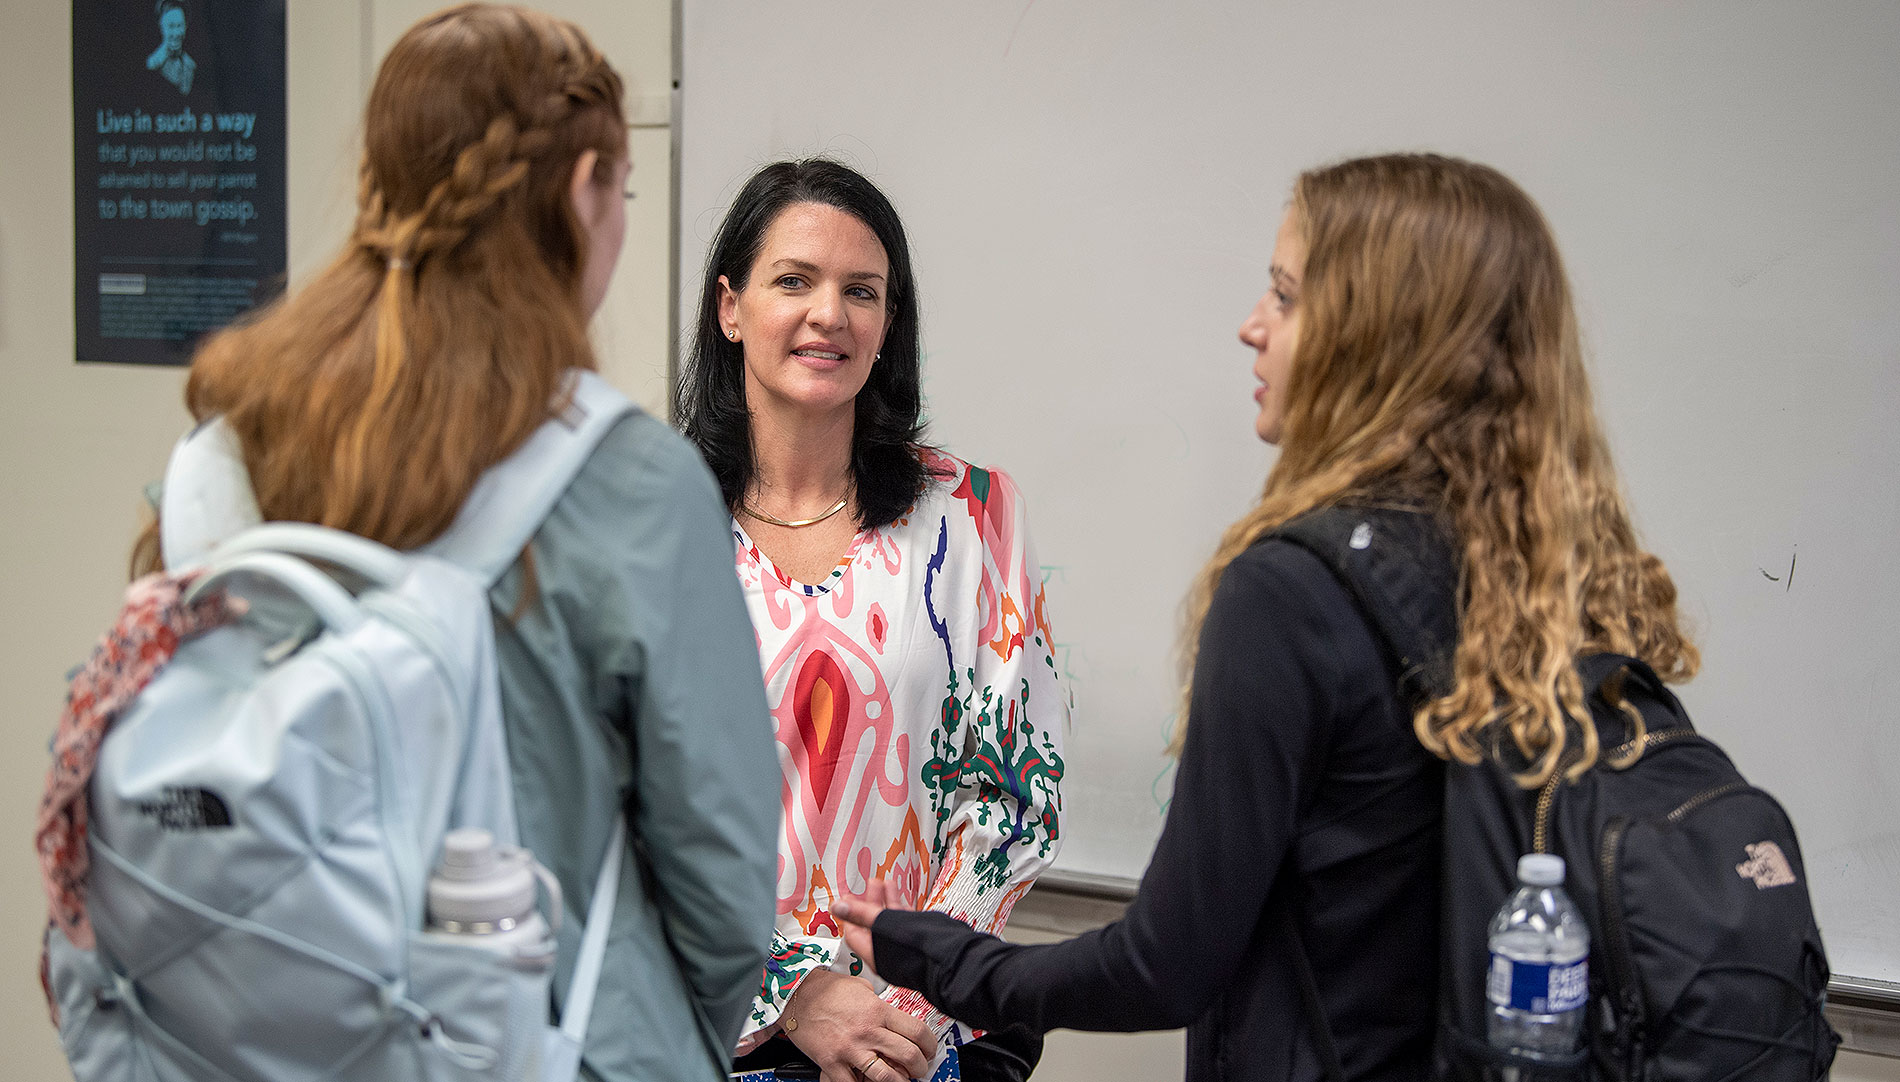             An Executive Marketing VP Returns to Campus to Give Back Real-World Experience     